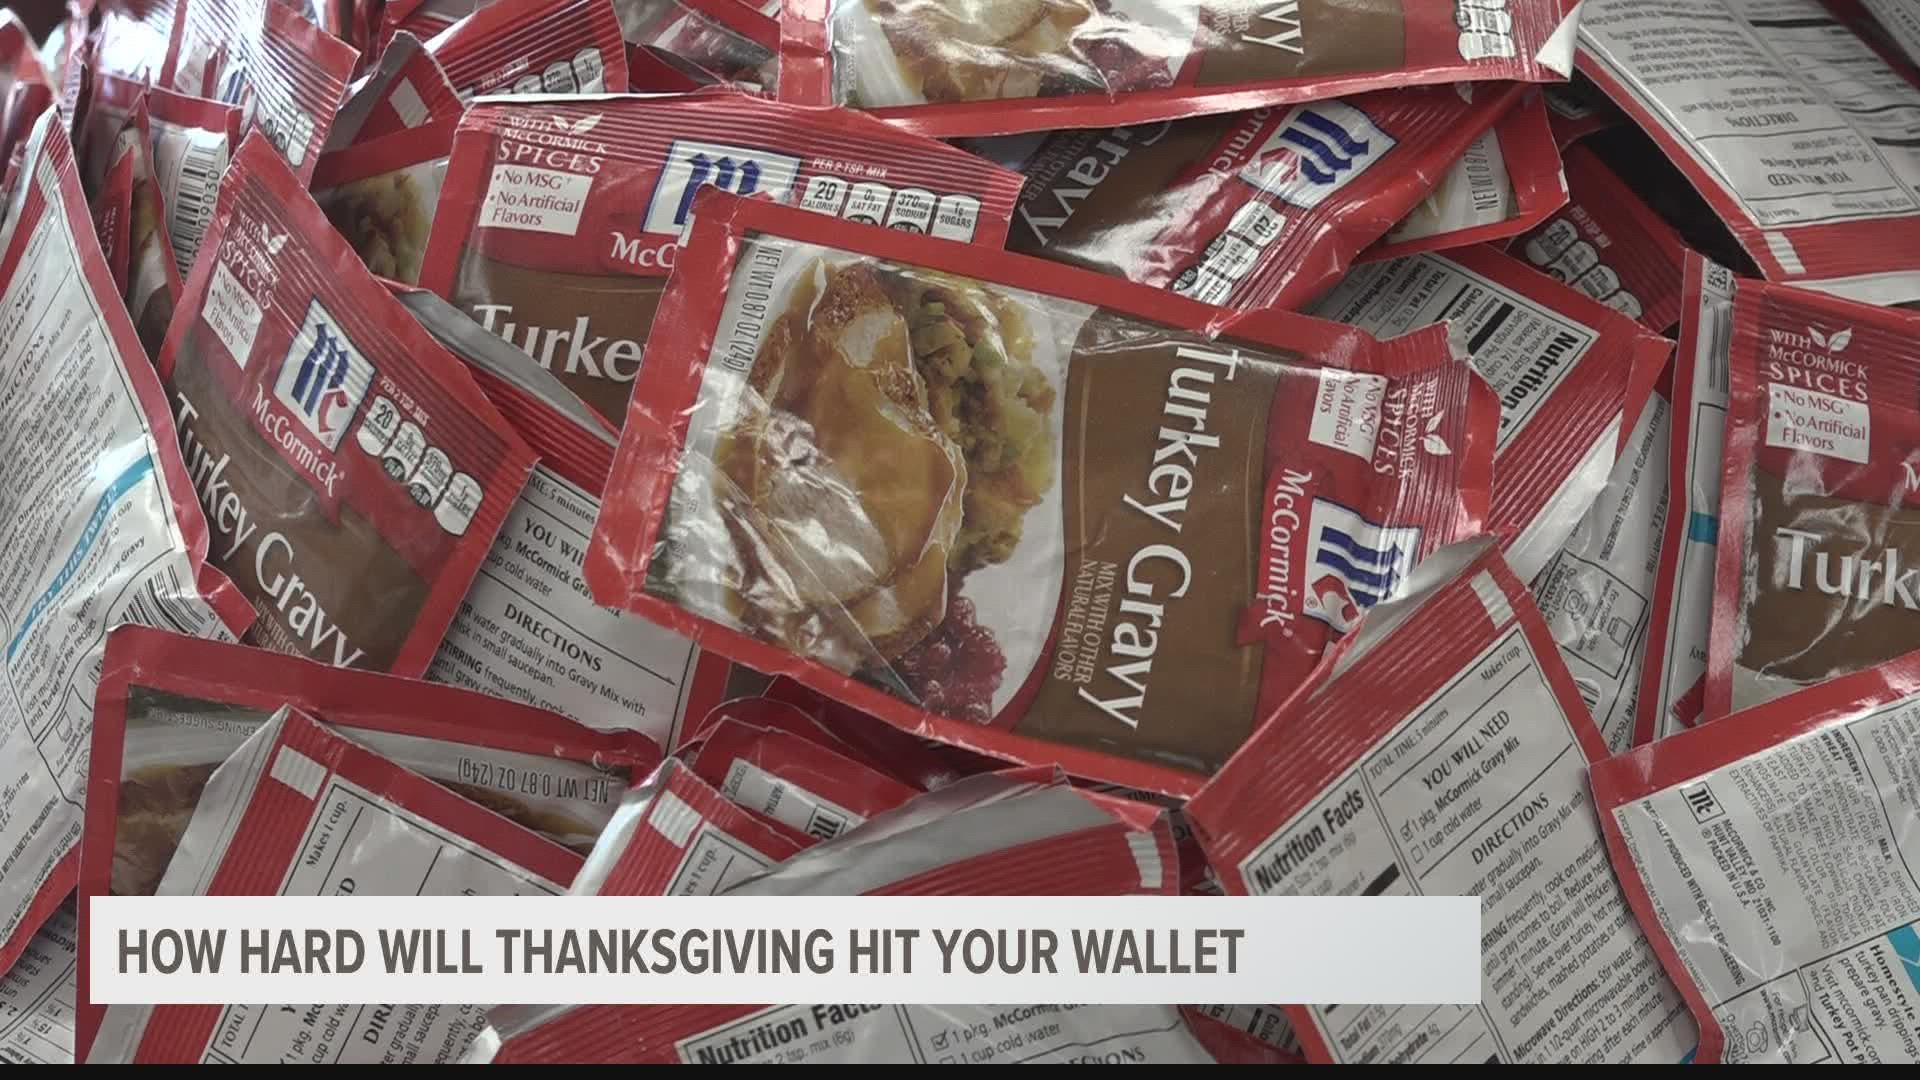 The turkey, stuffing, and just about everything are going to cost you more but not by much.